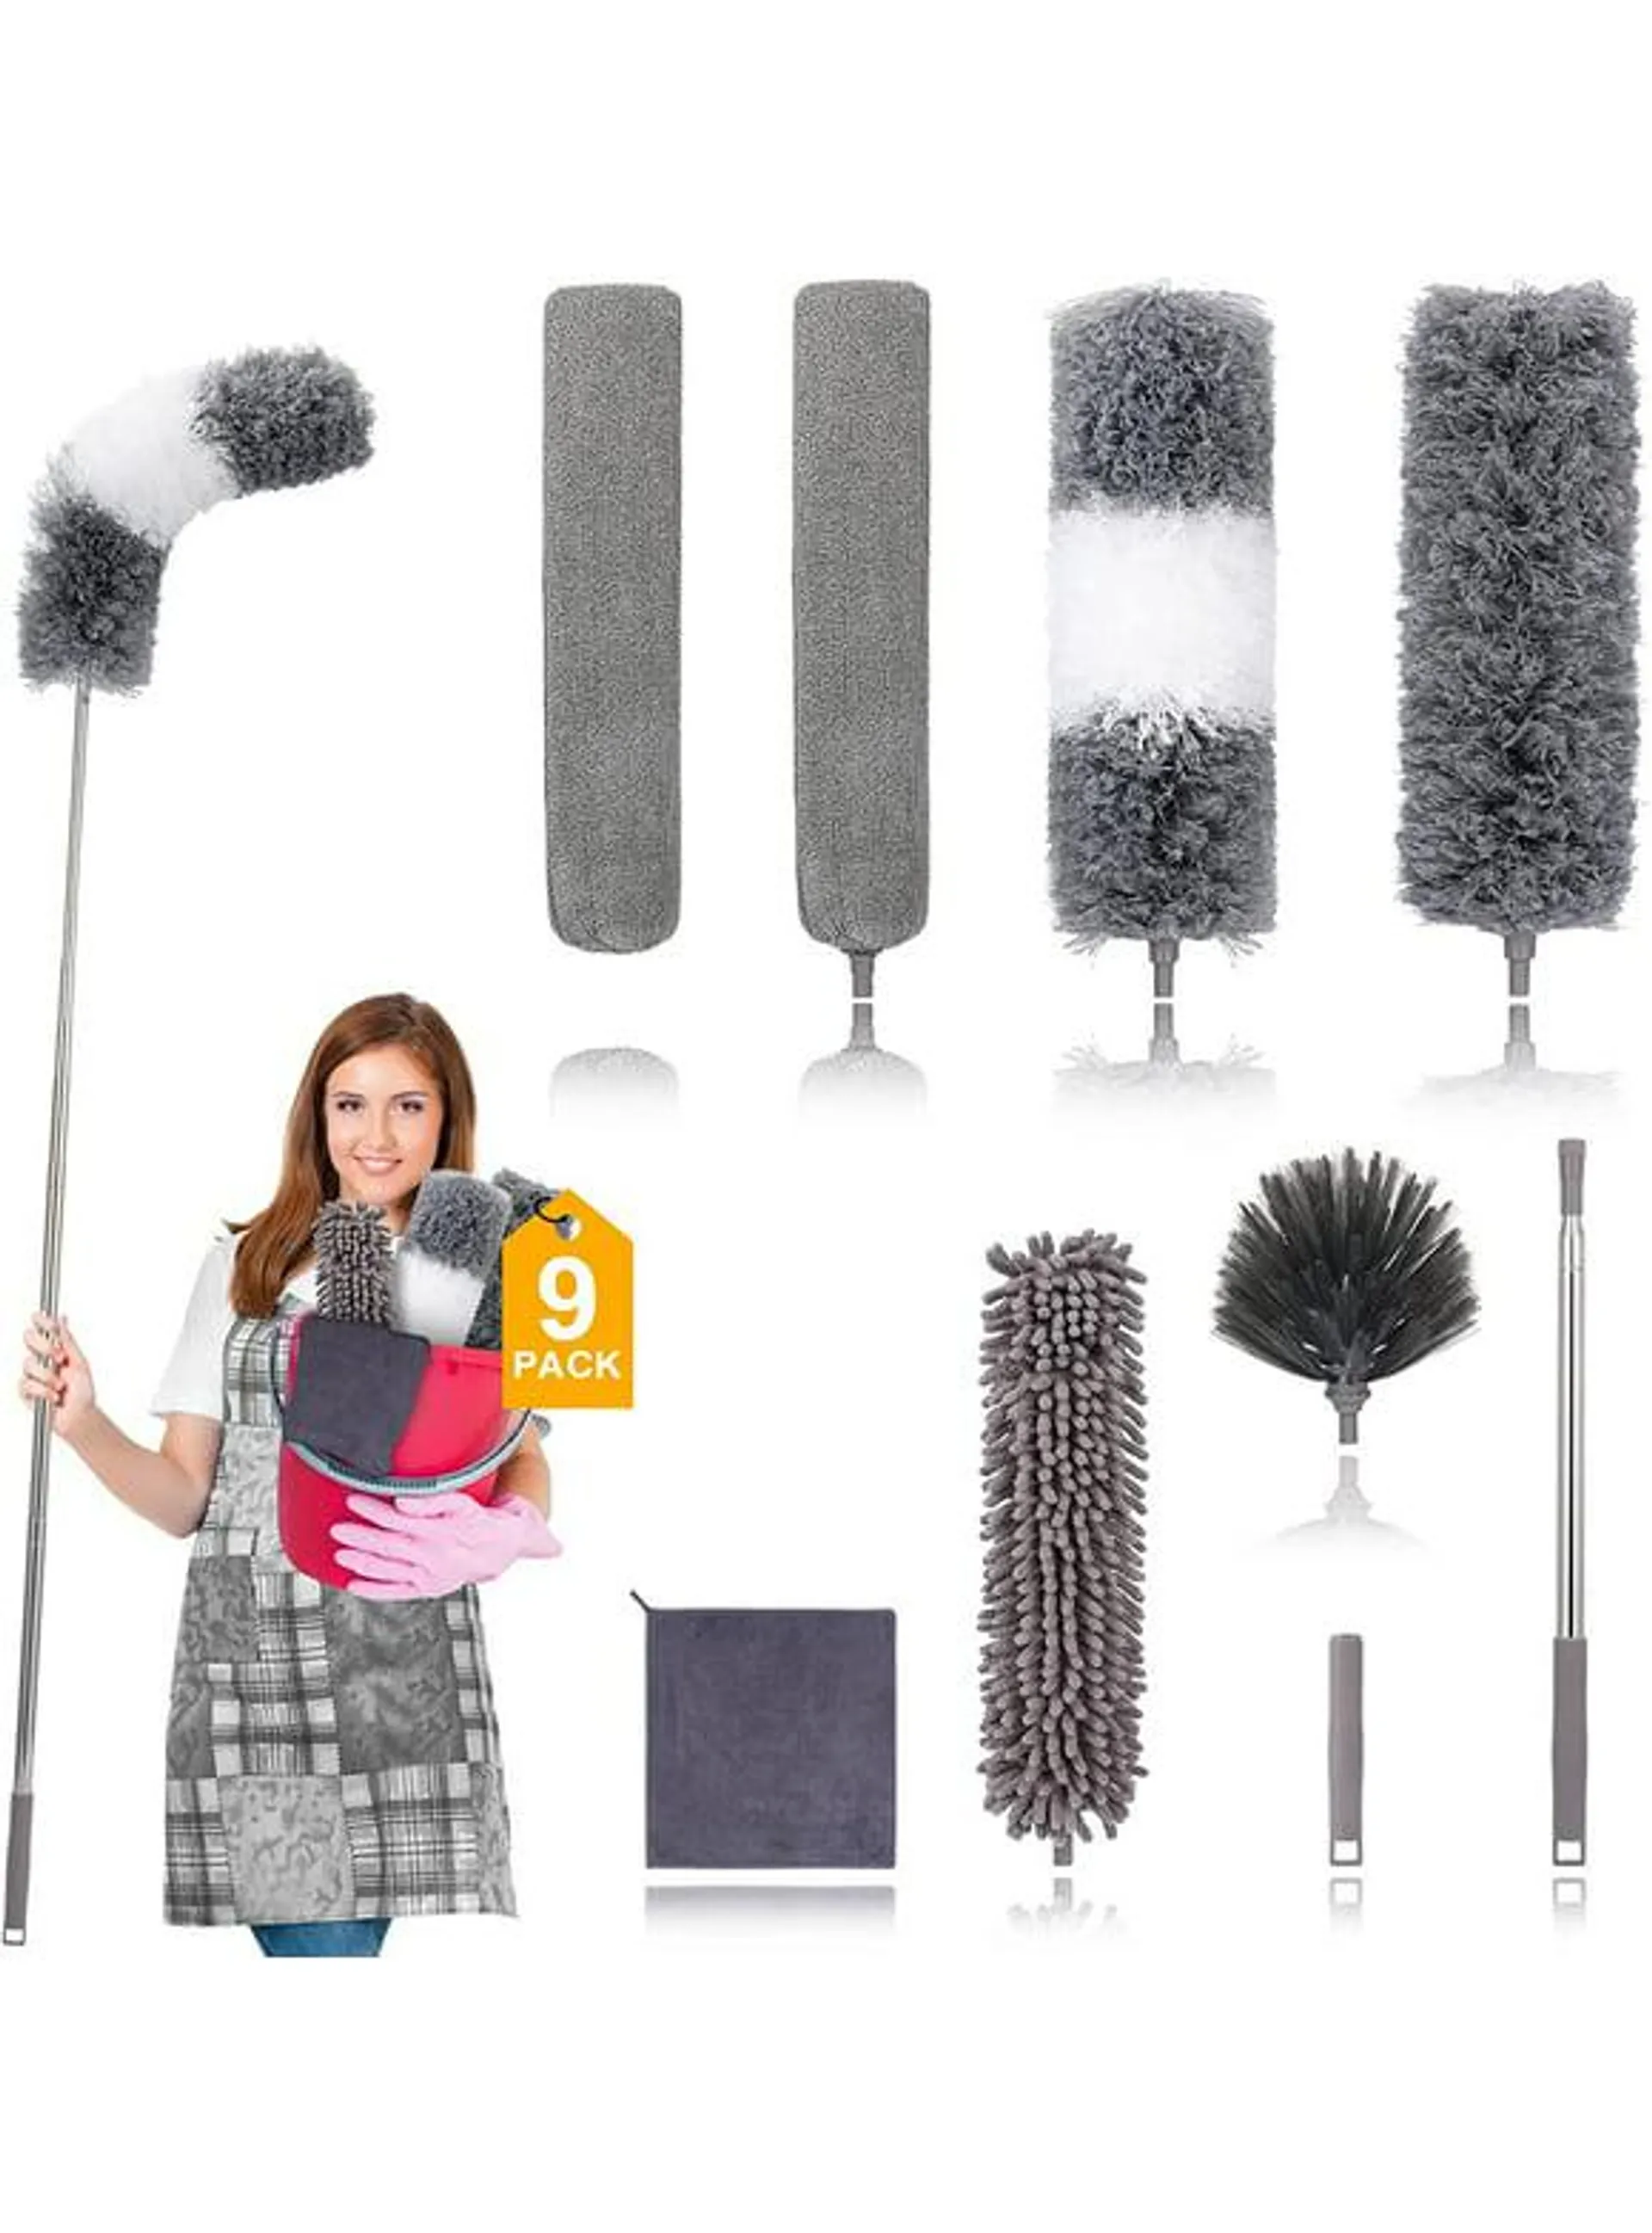 Microfiber Duster, 9PCS Extendable Feather Duster (Stainless Steel) 30 to 100 Inches, Reusable Bendable Dusters, Washable Dusters for Cleaning Ceiling Fan, High Ceiling, Blinds, Furniture, Cars